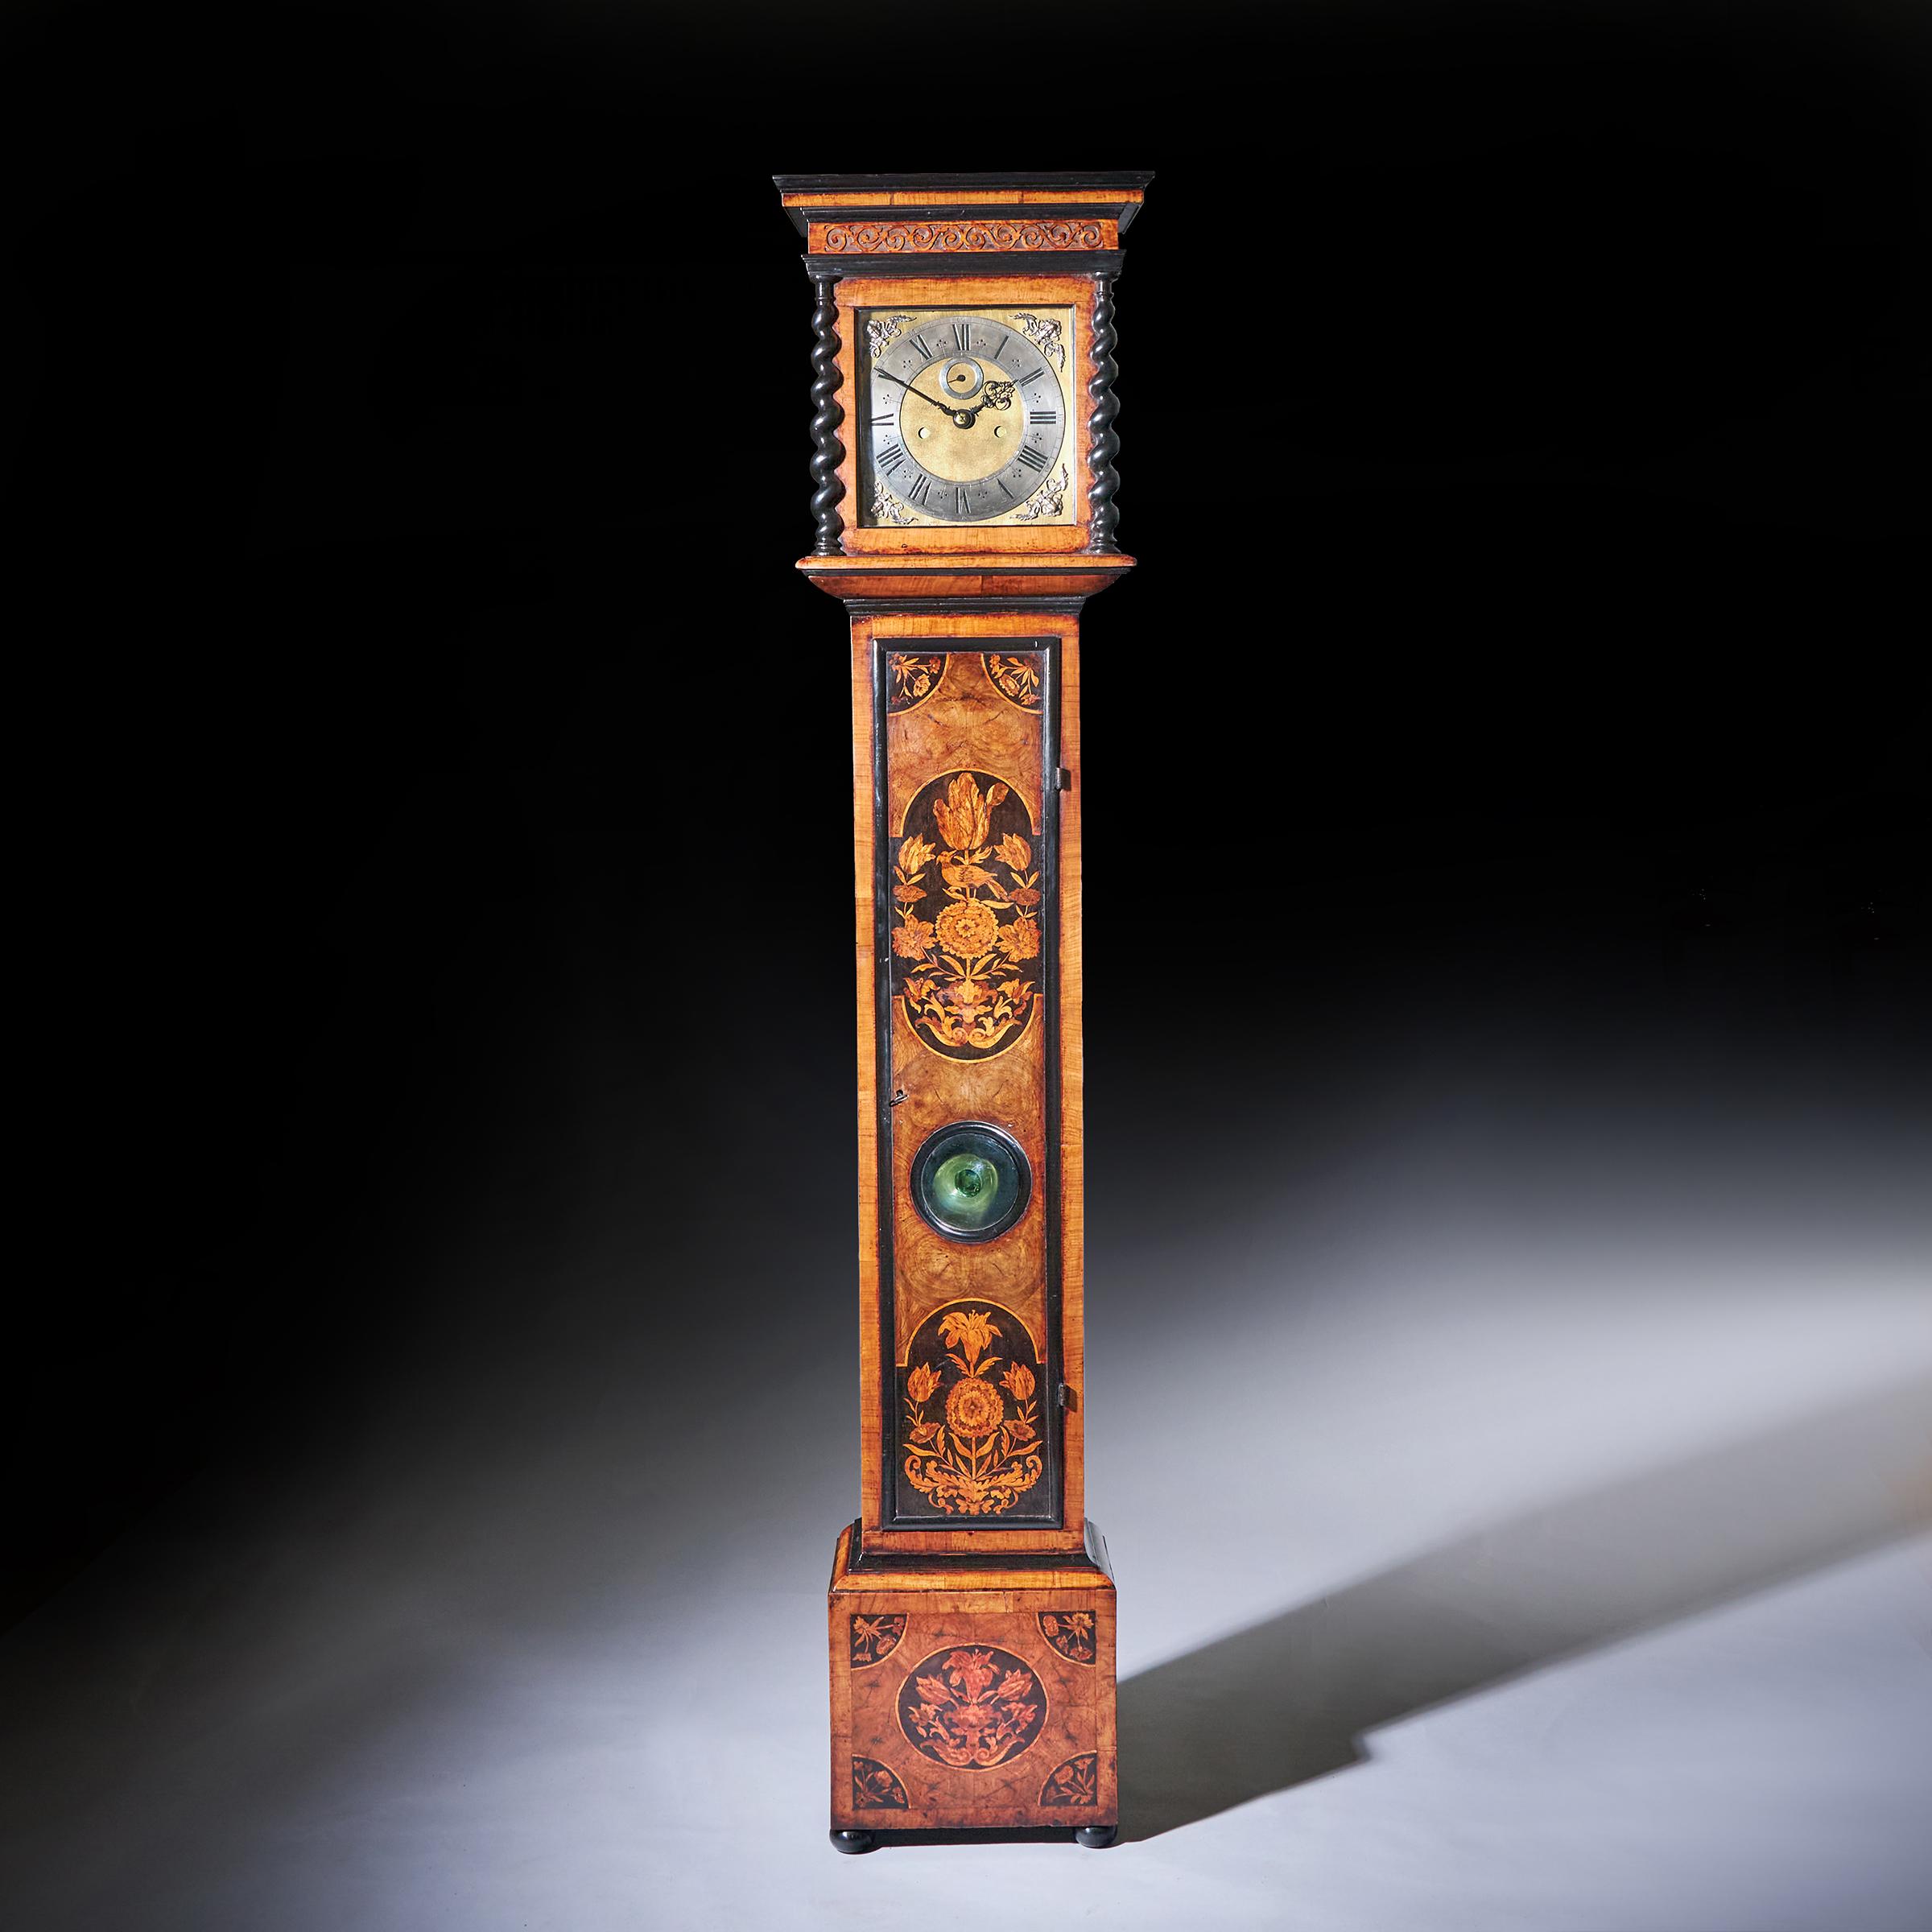 A wonderful late seventeenth century rising hood 10-inch William and Mary eight-day floral marquetry olive oyster longcase clock by Edmund Appley, London, c. 1680-1685.

The attractive and fine olive oyster-veneered case is of the highest quality